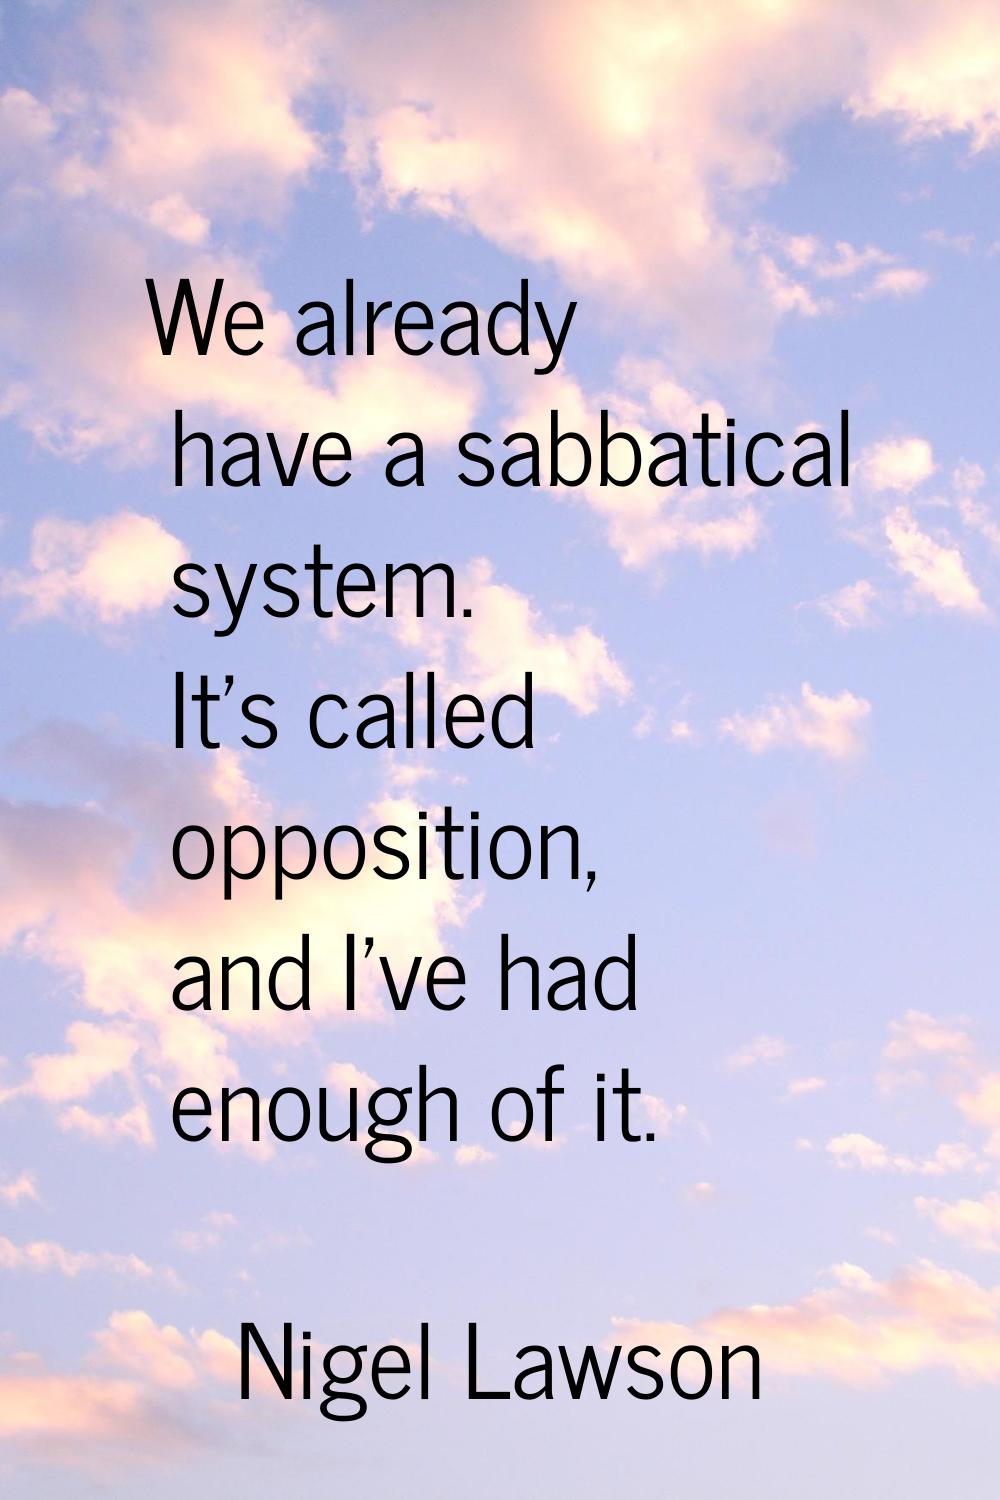 We already have a sabbatical system. It's called opposition, and I've had enough of it.